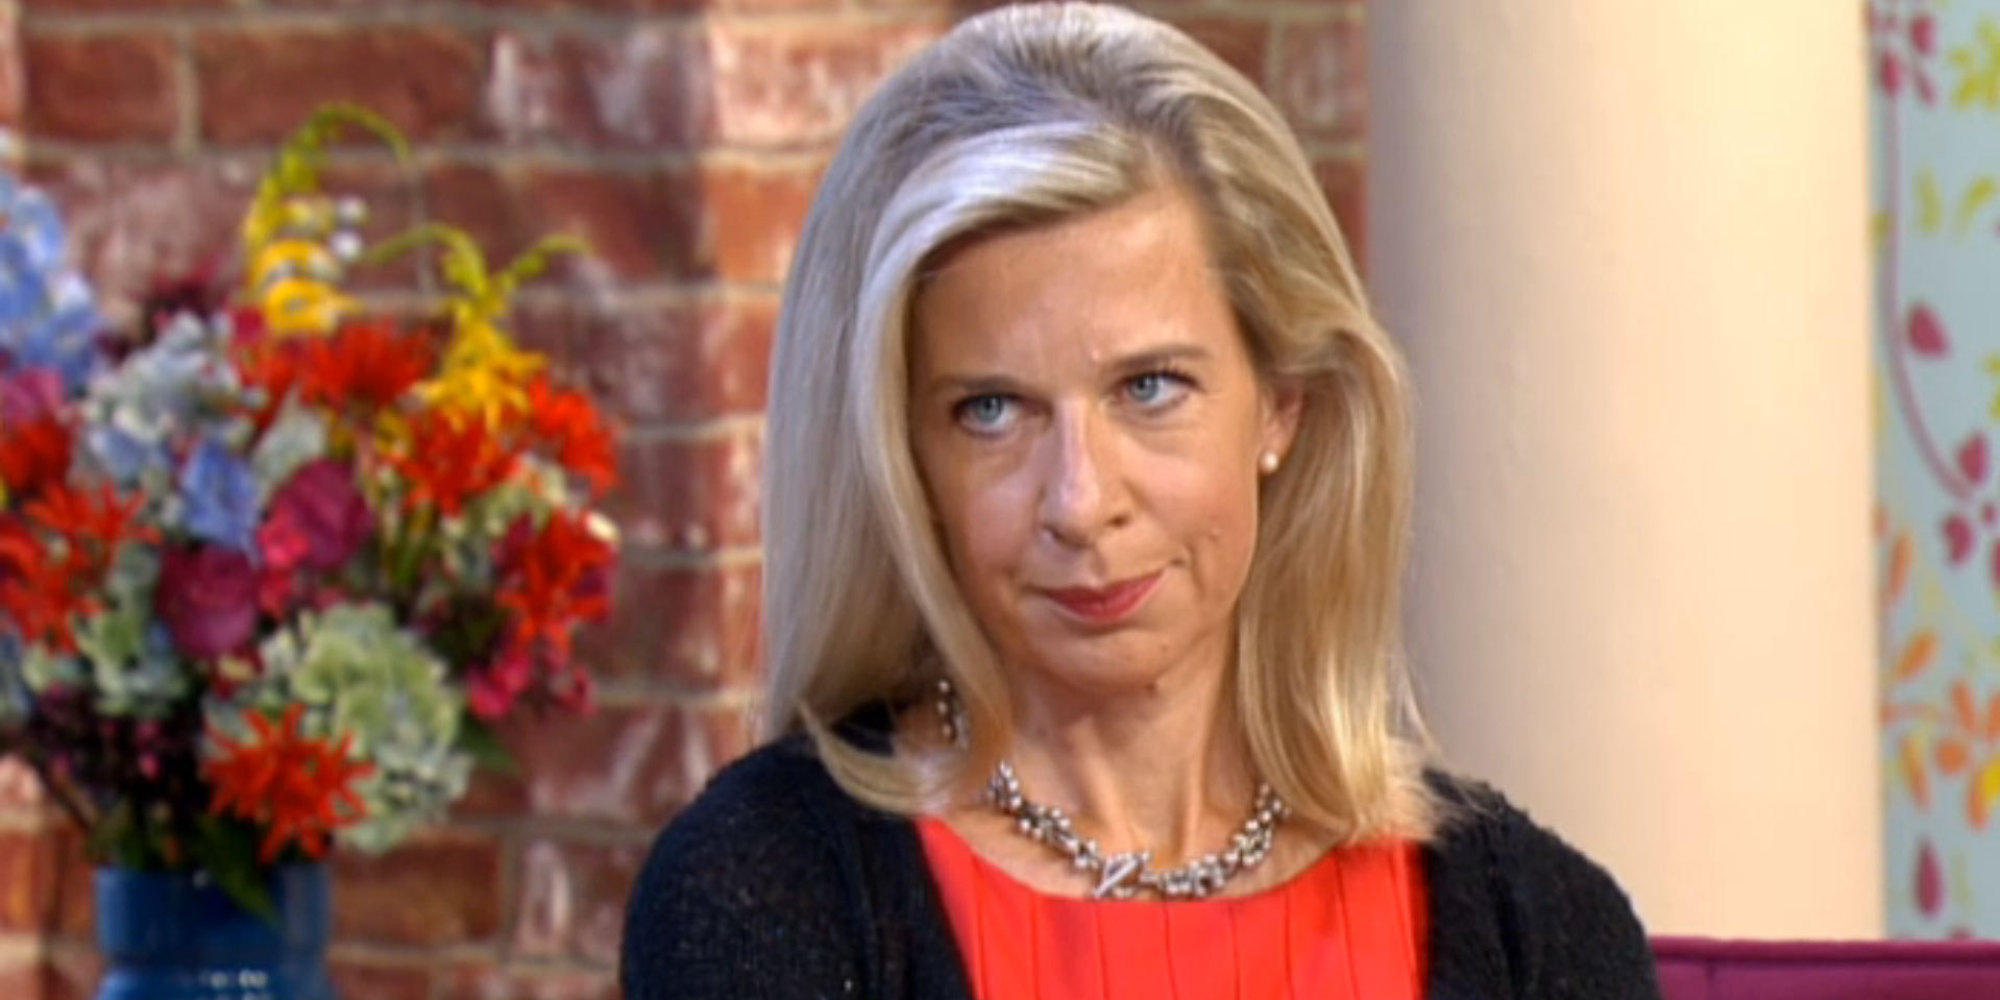 Katie Hopkins Returns To 'This Morning' But Proves Less Controversial With Her Views ...